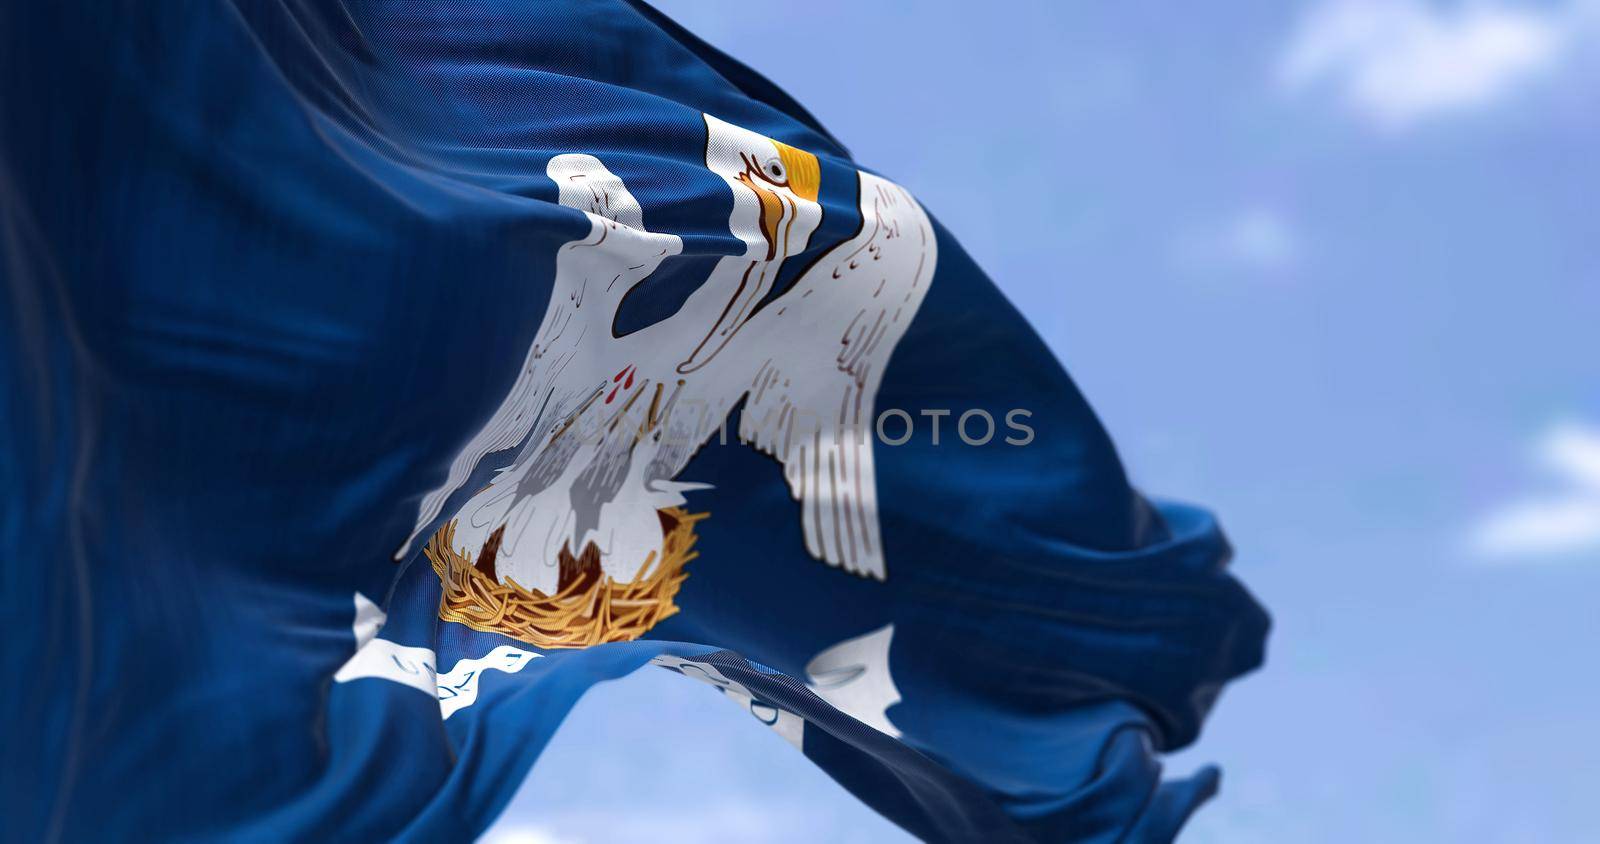 The US state flag of Louisiana waving in the wind. Louisiana is a state in the Deep South and South Central regions of the United States. Democracy and independence.